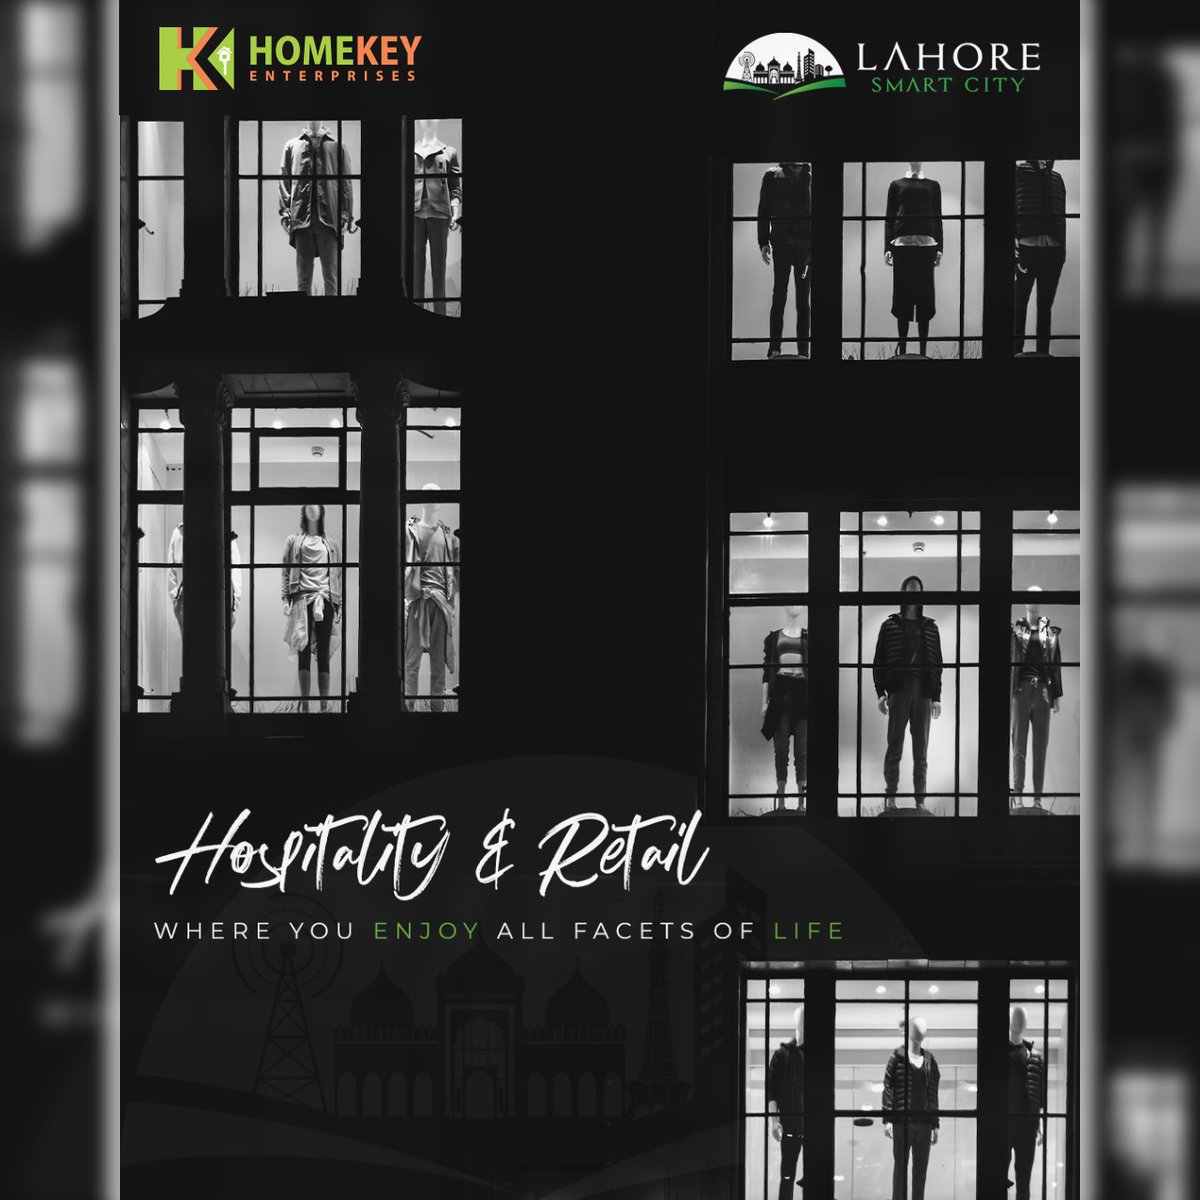 The Overseas Block of Lahore Smart City develops on international standards. Top-class hospitality and retail services will make your life easier, more convenient, and futuristic.
#homekeyenterprises #SMartCity #LahoreSmartCity #LSCCommercial #OverseasBlock #Overseas #Commercial